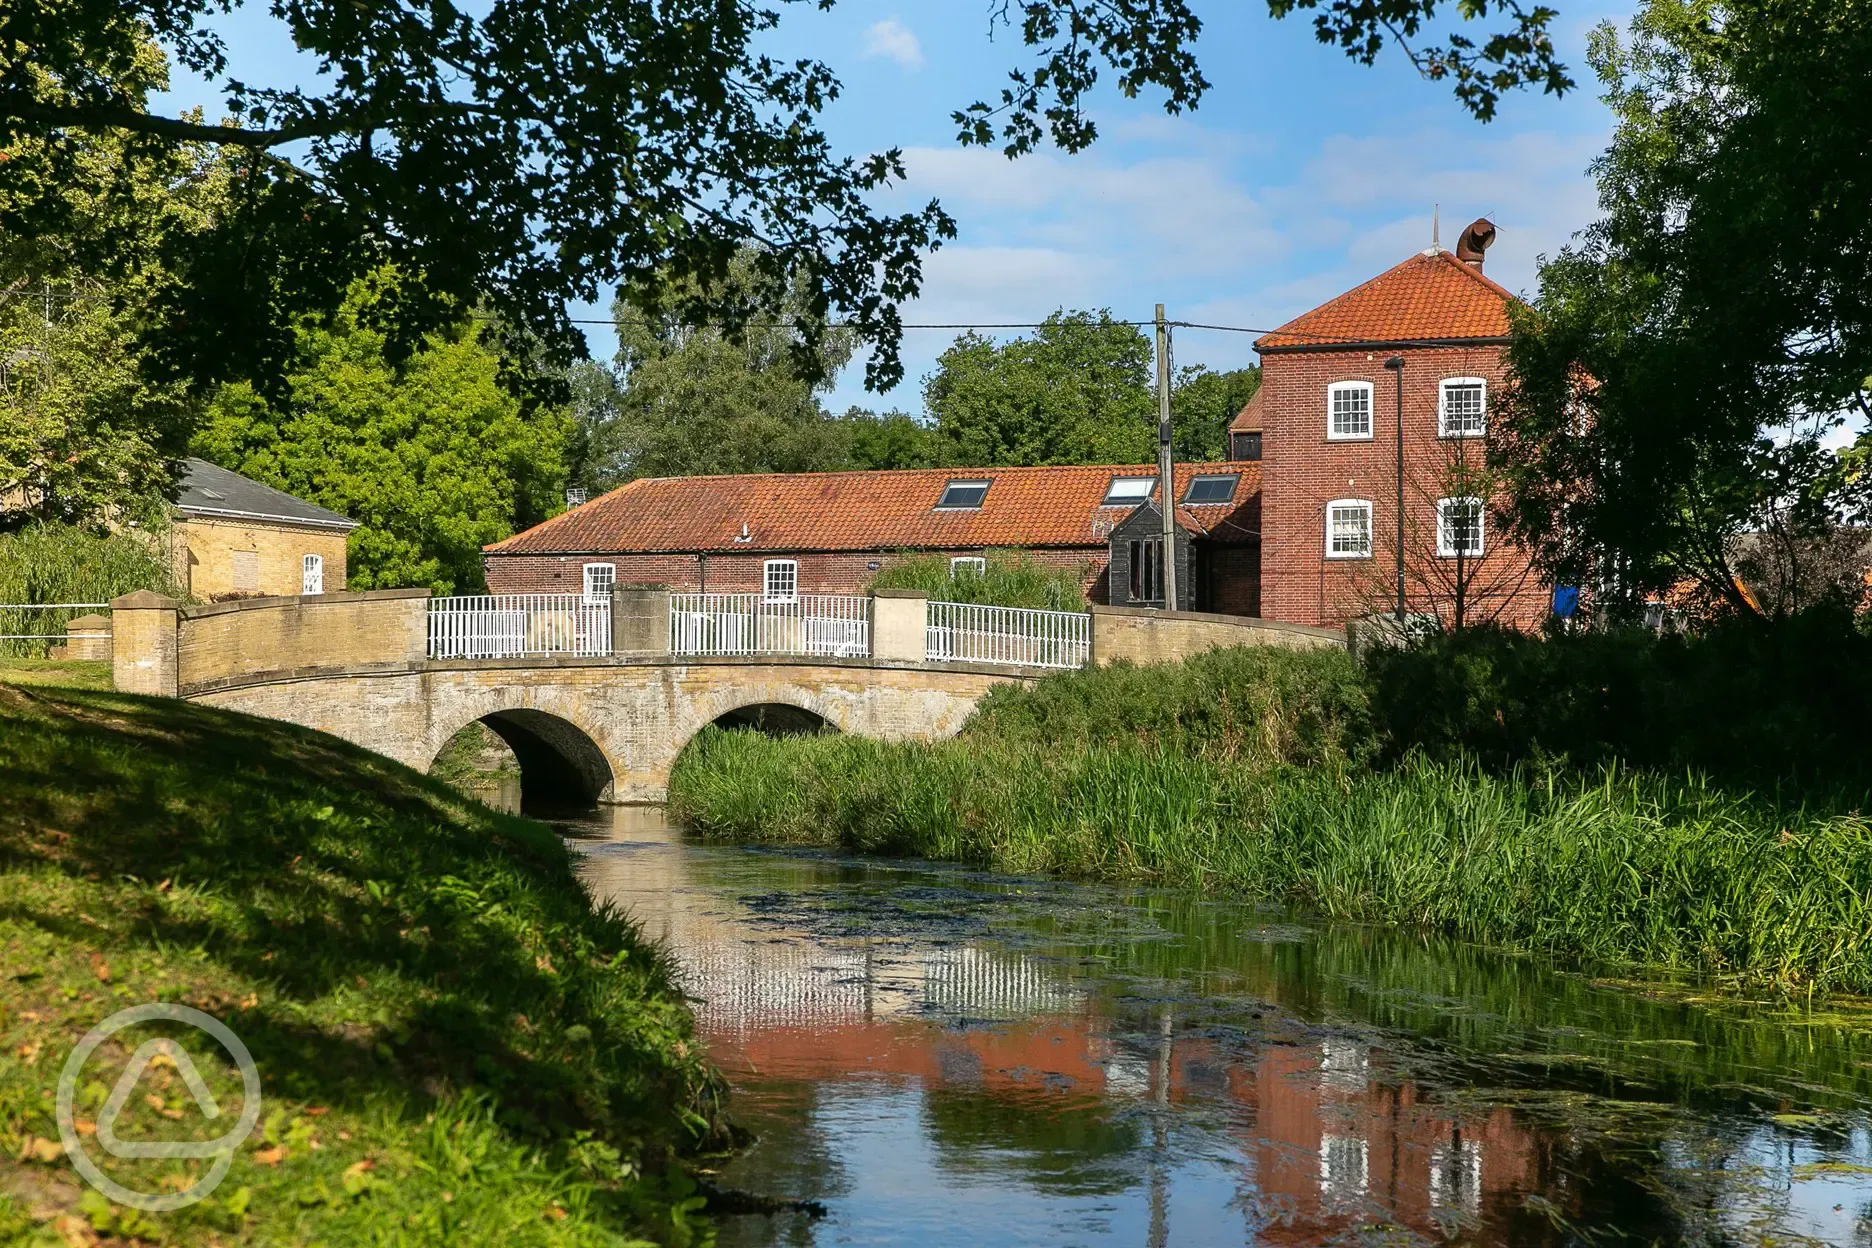 Bridge over the River Wensum - 5 mins walk from site